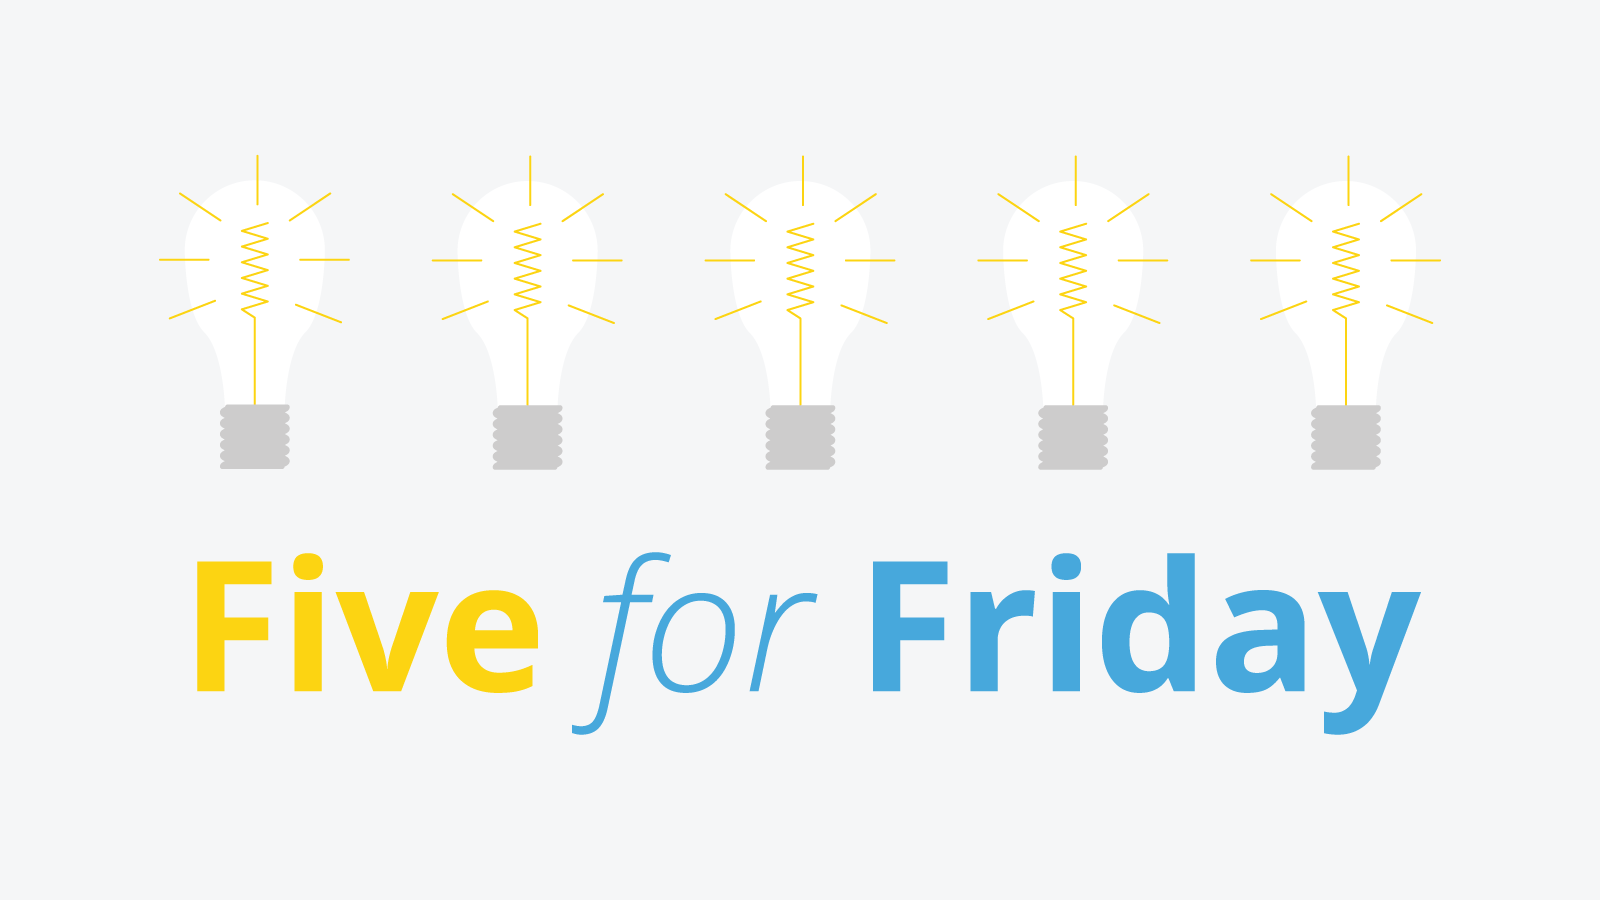 Five for Friday: Employee recognition